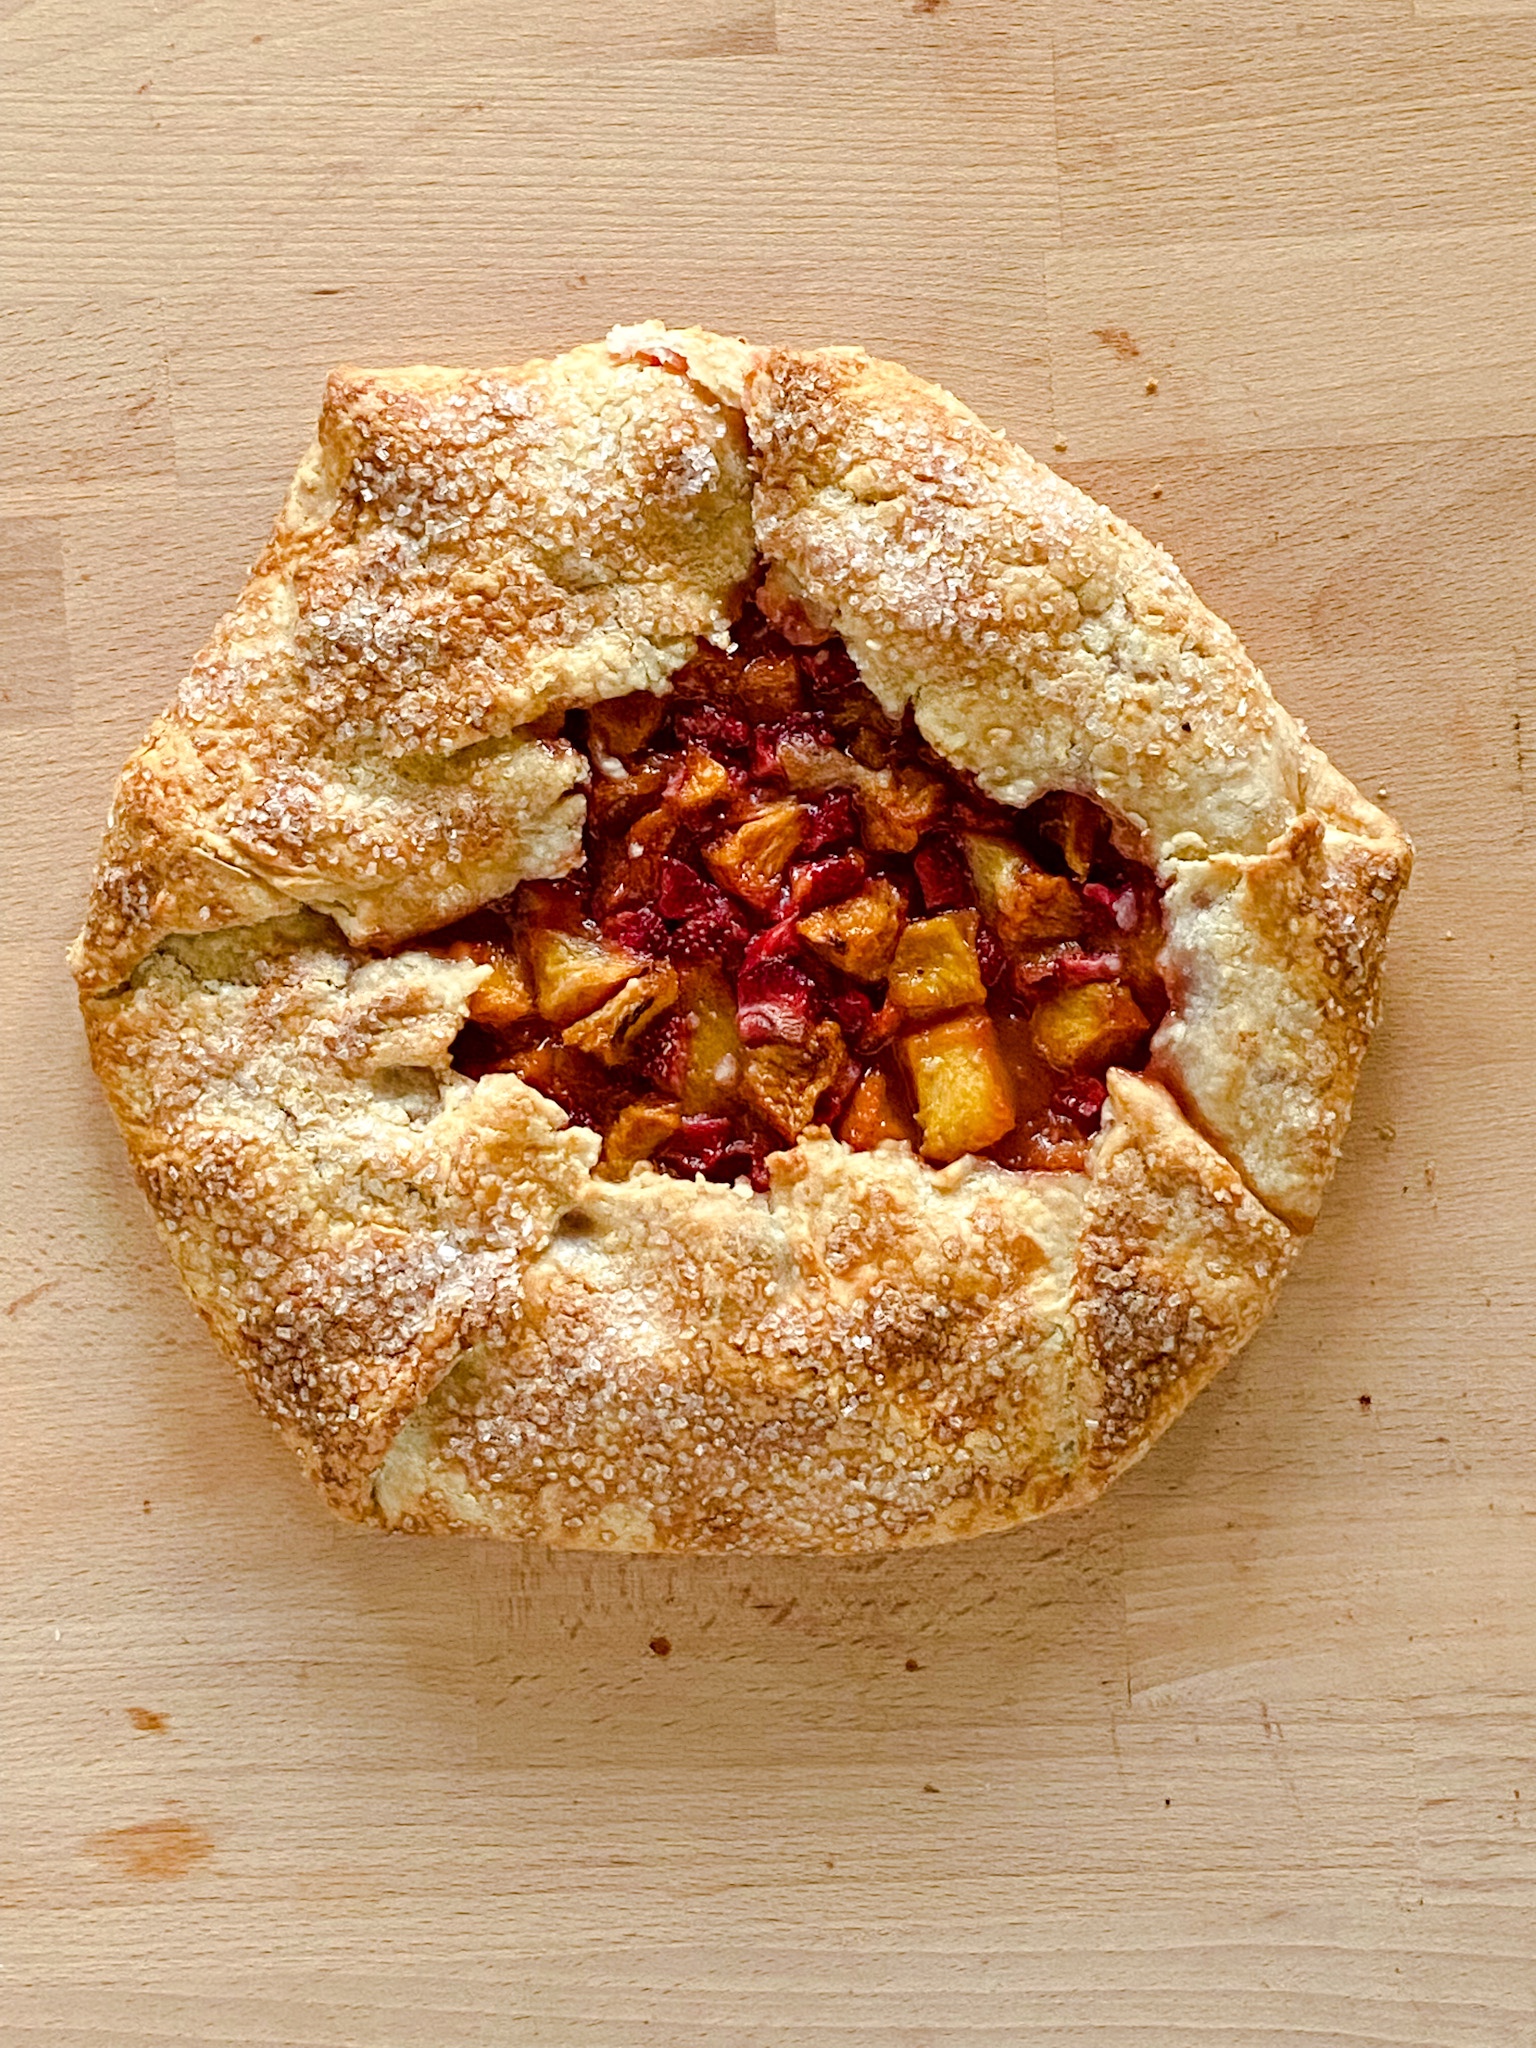 A single crust rustic tart filled with red and yellow fruits sits on a wooden surface.